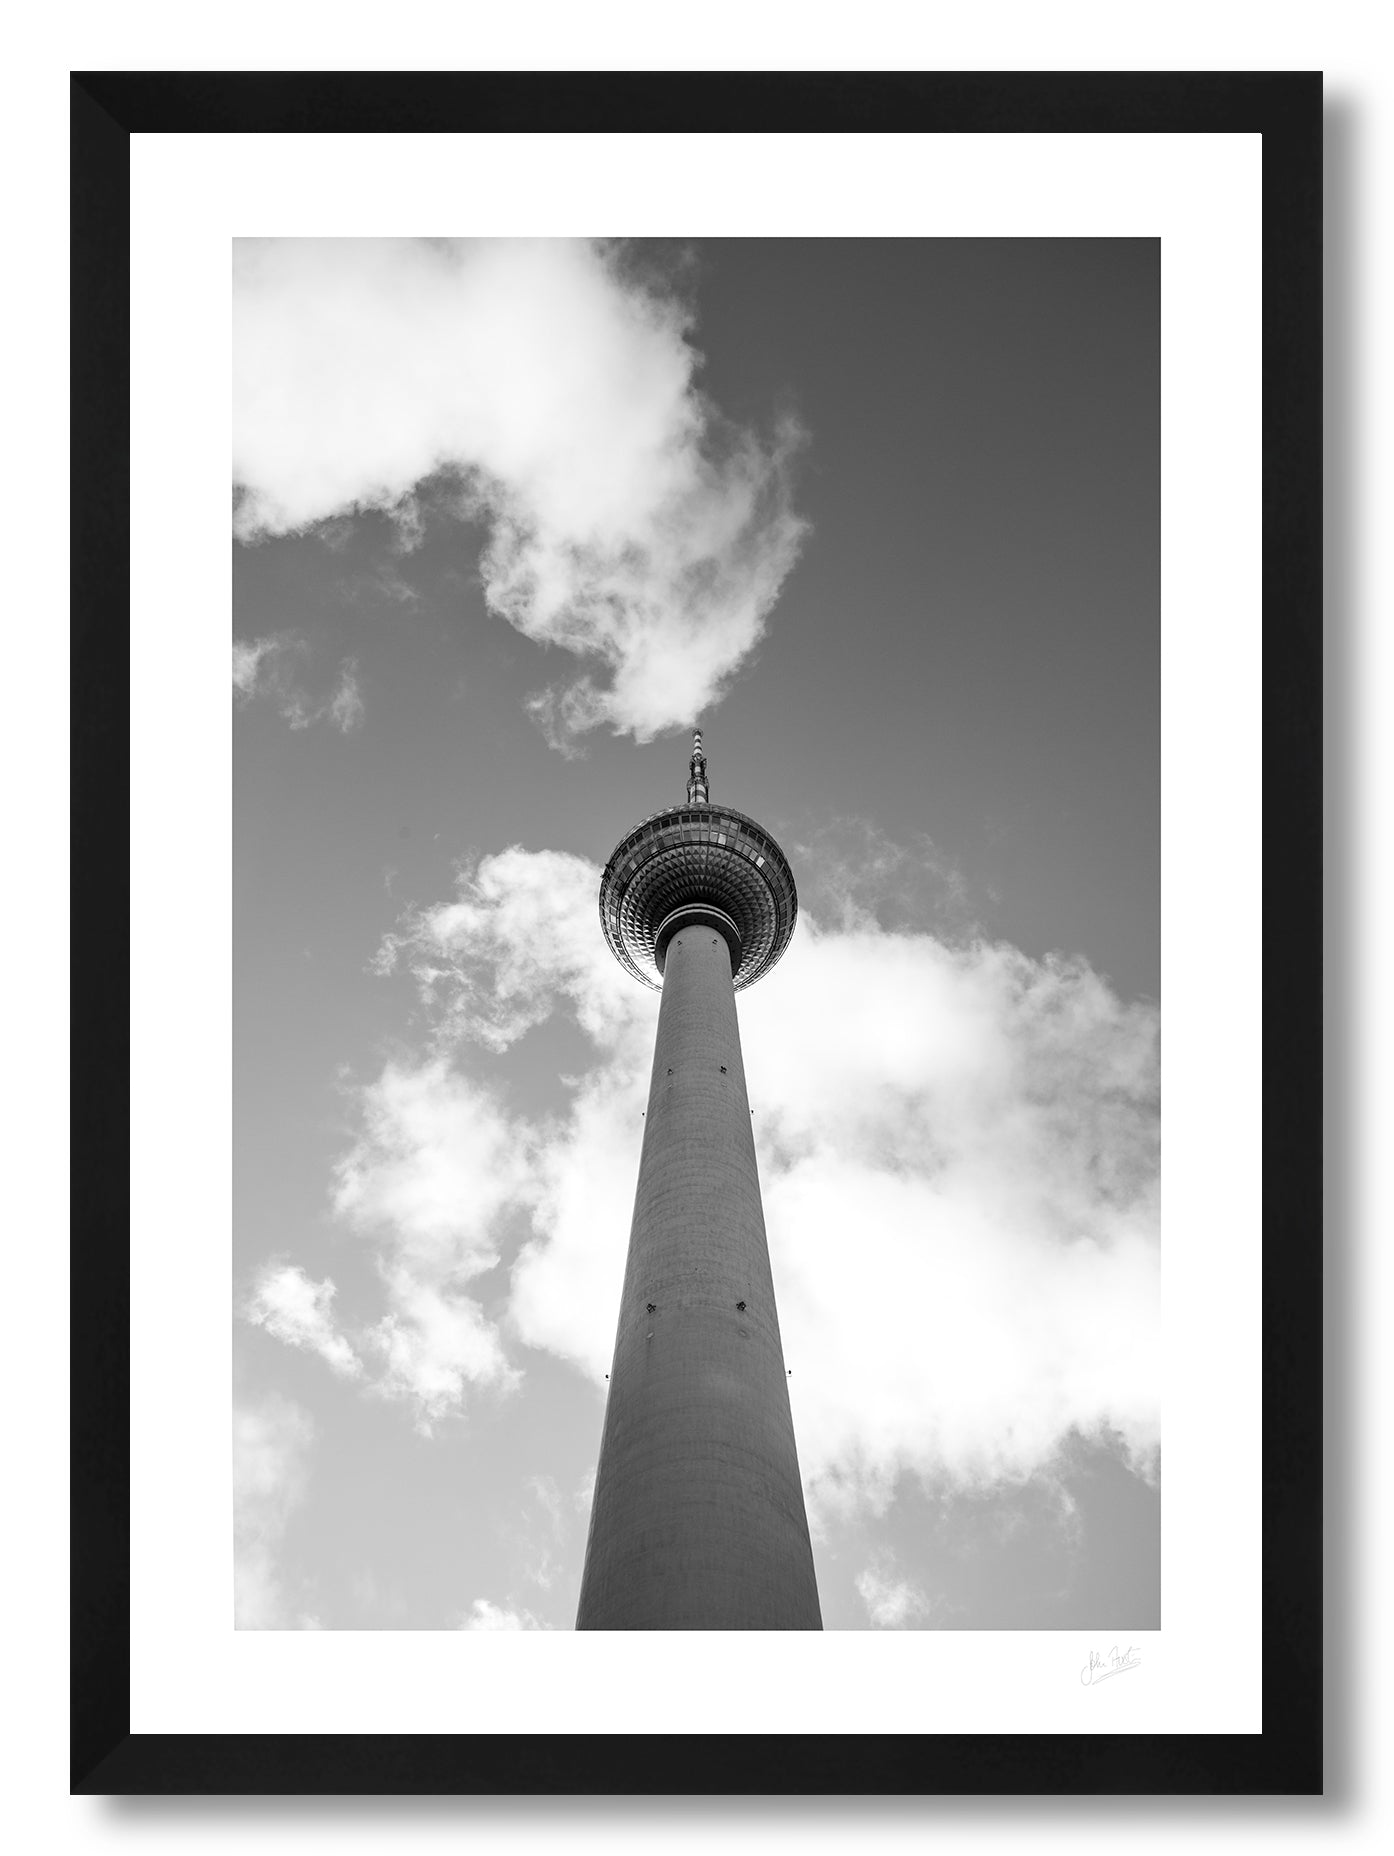 framed print of Berlin's TV tower from below touching the clouds in the sky